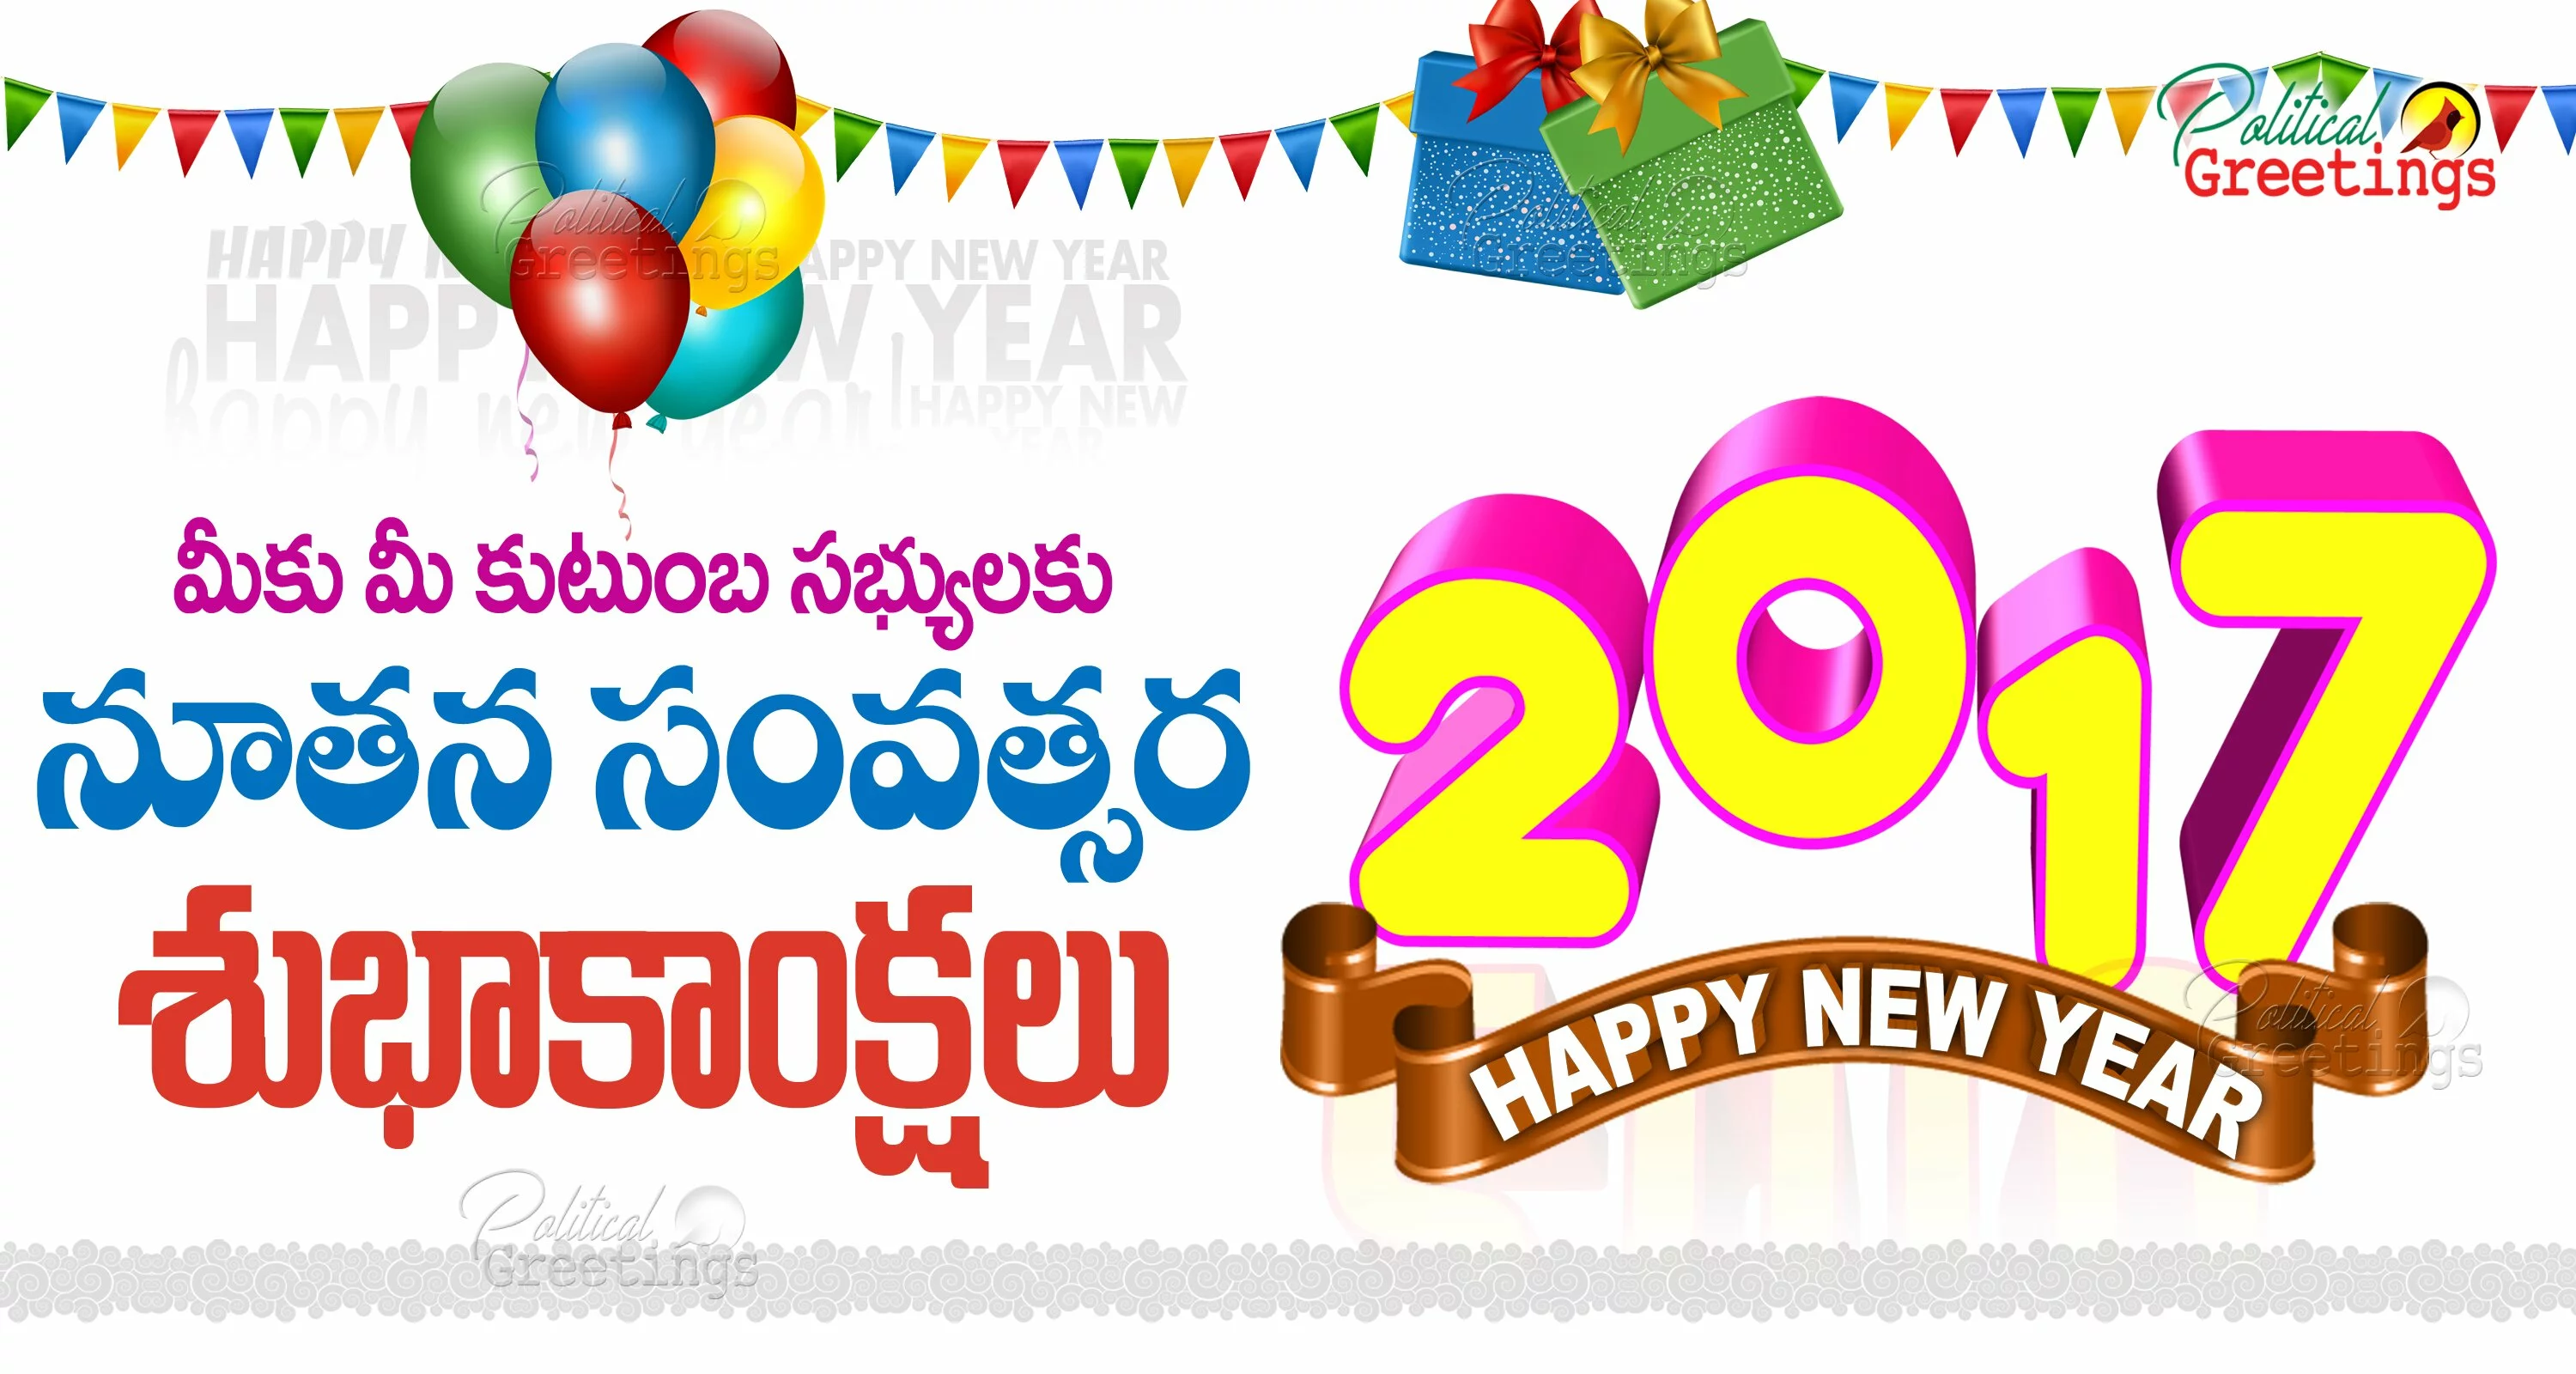 happy-new-year-2017-latest-telugu-quotes-and-sayings-hd-images-copy